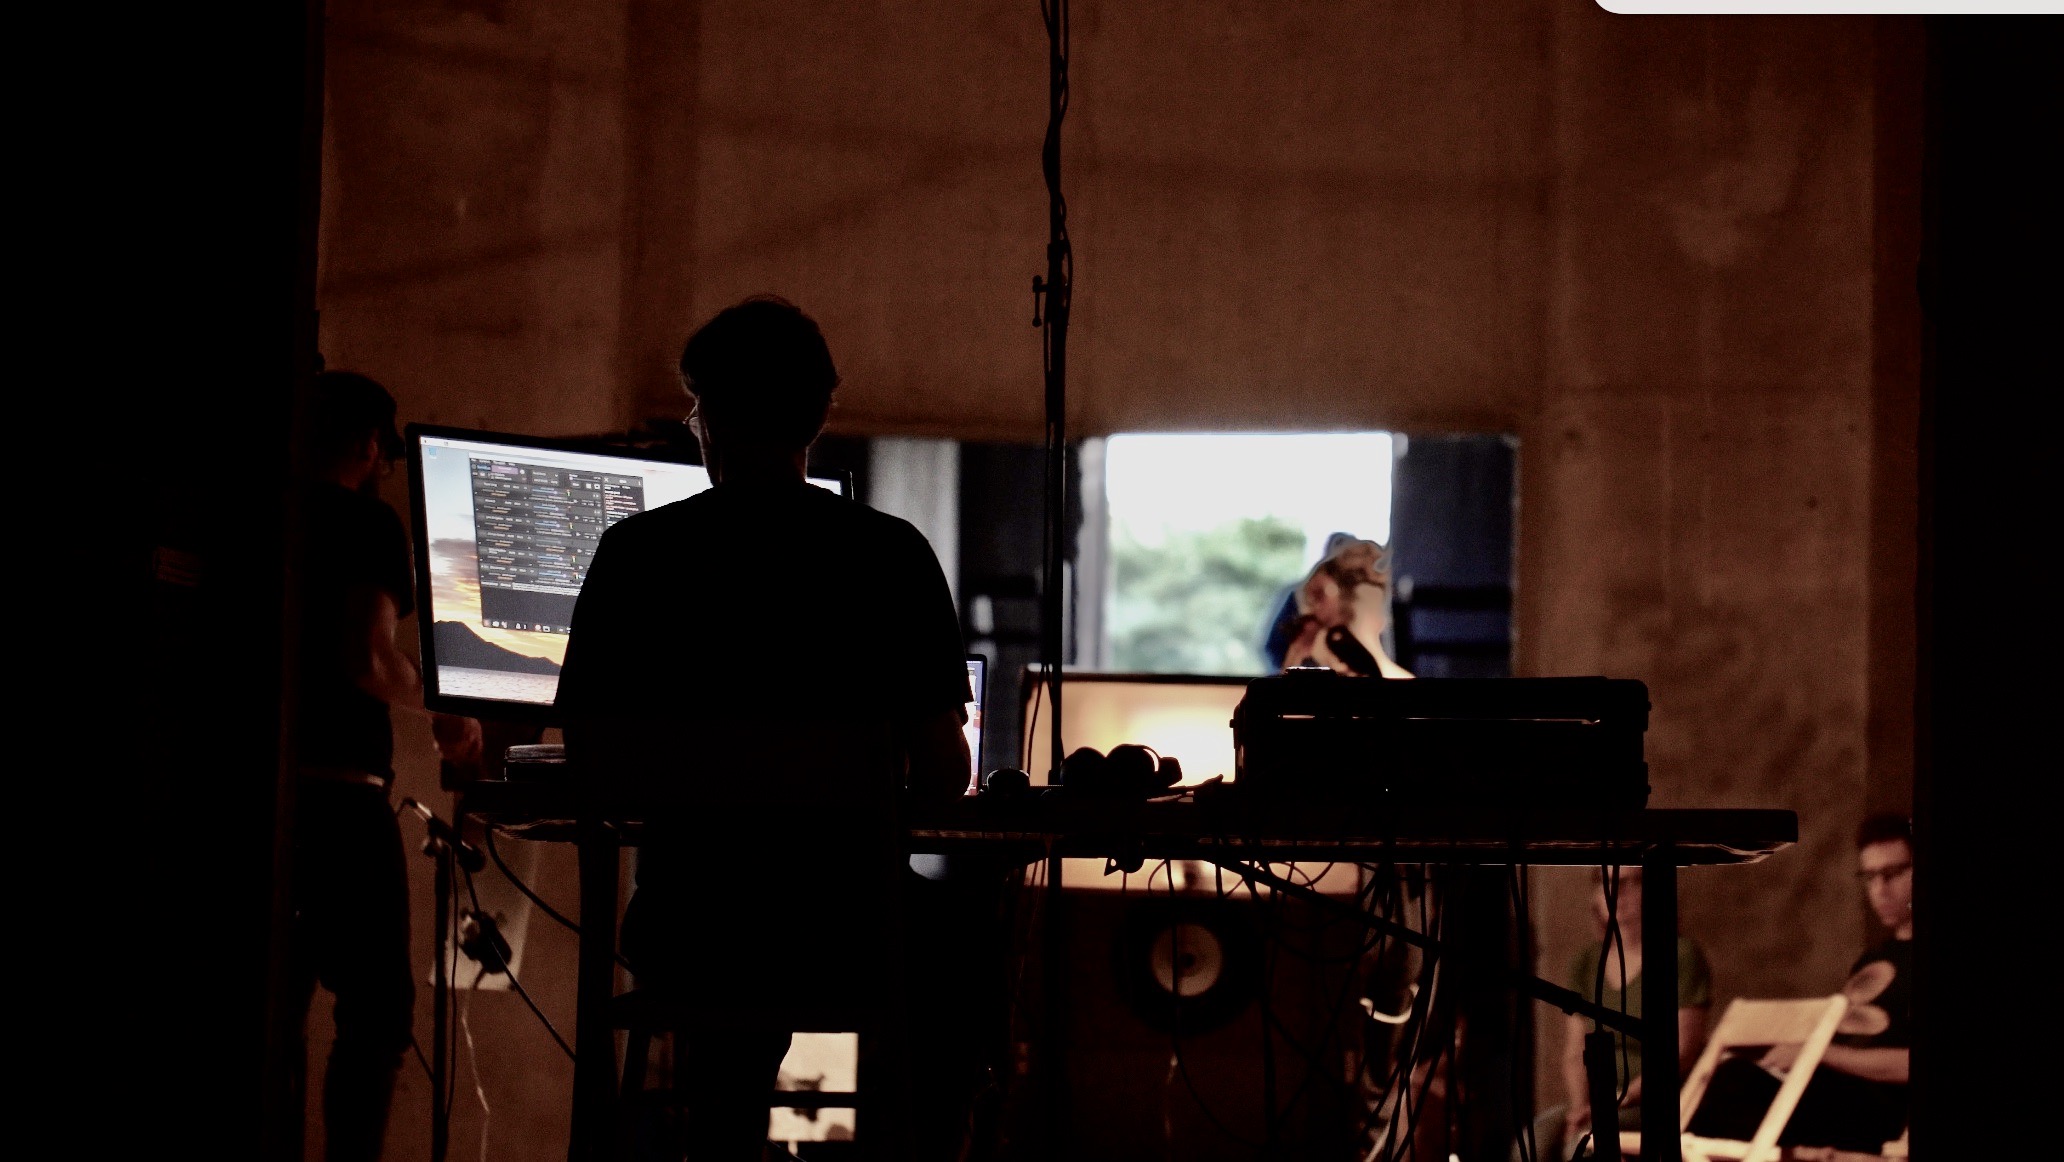 A photograph of Rob Cosgrove as he performs his sound piece, Floaters inside Silo City in September 2022. Rob is seen from behind inside a large concrete structure. He is facing a computer. In the background, you can see another musician performing as part of the work.